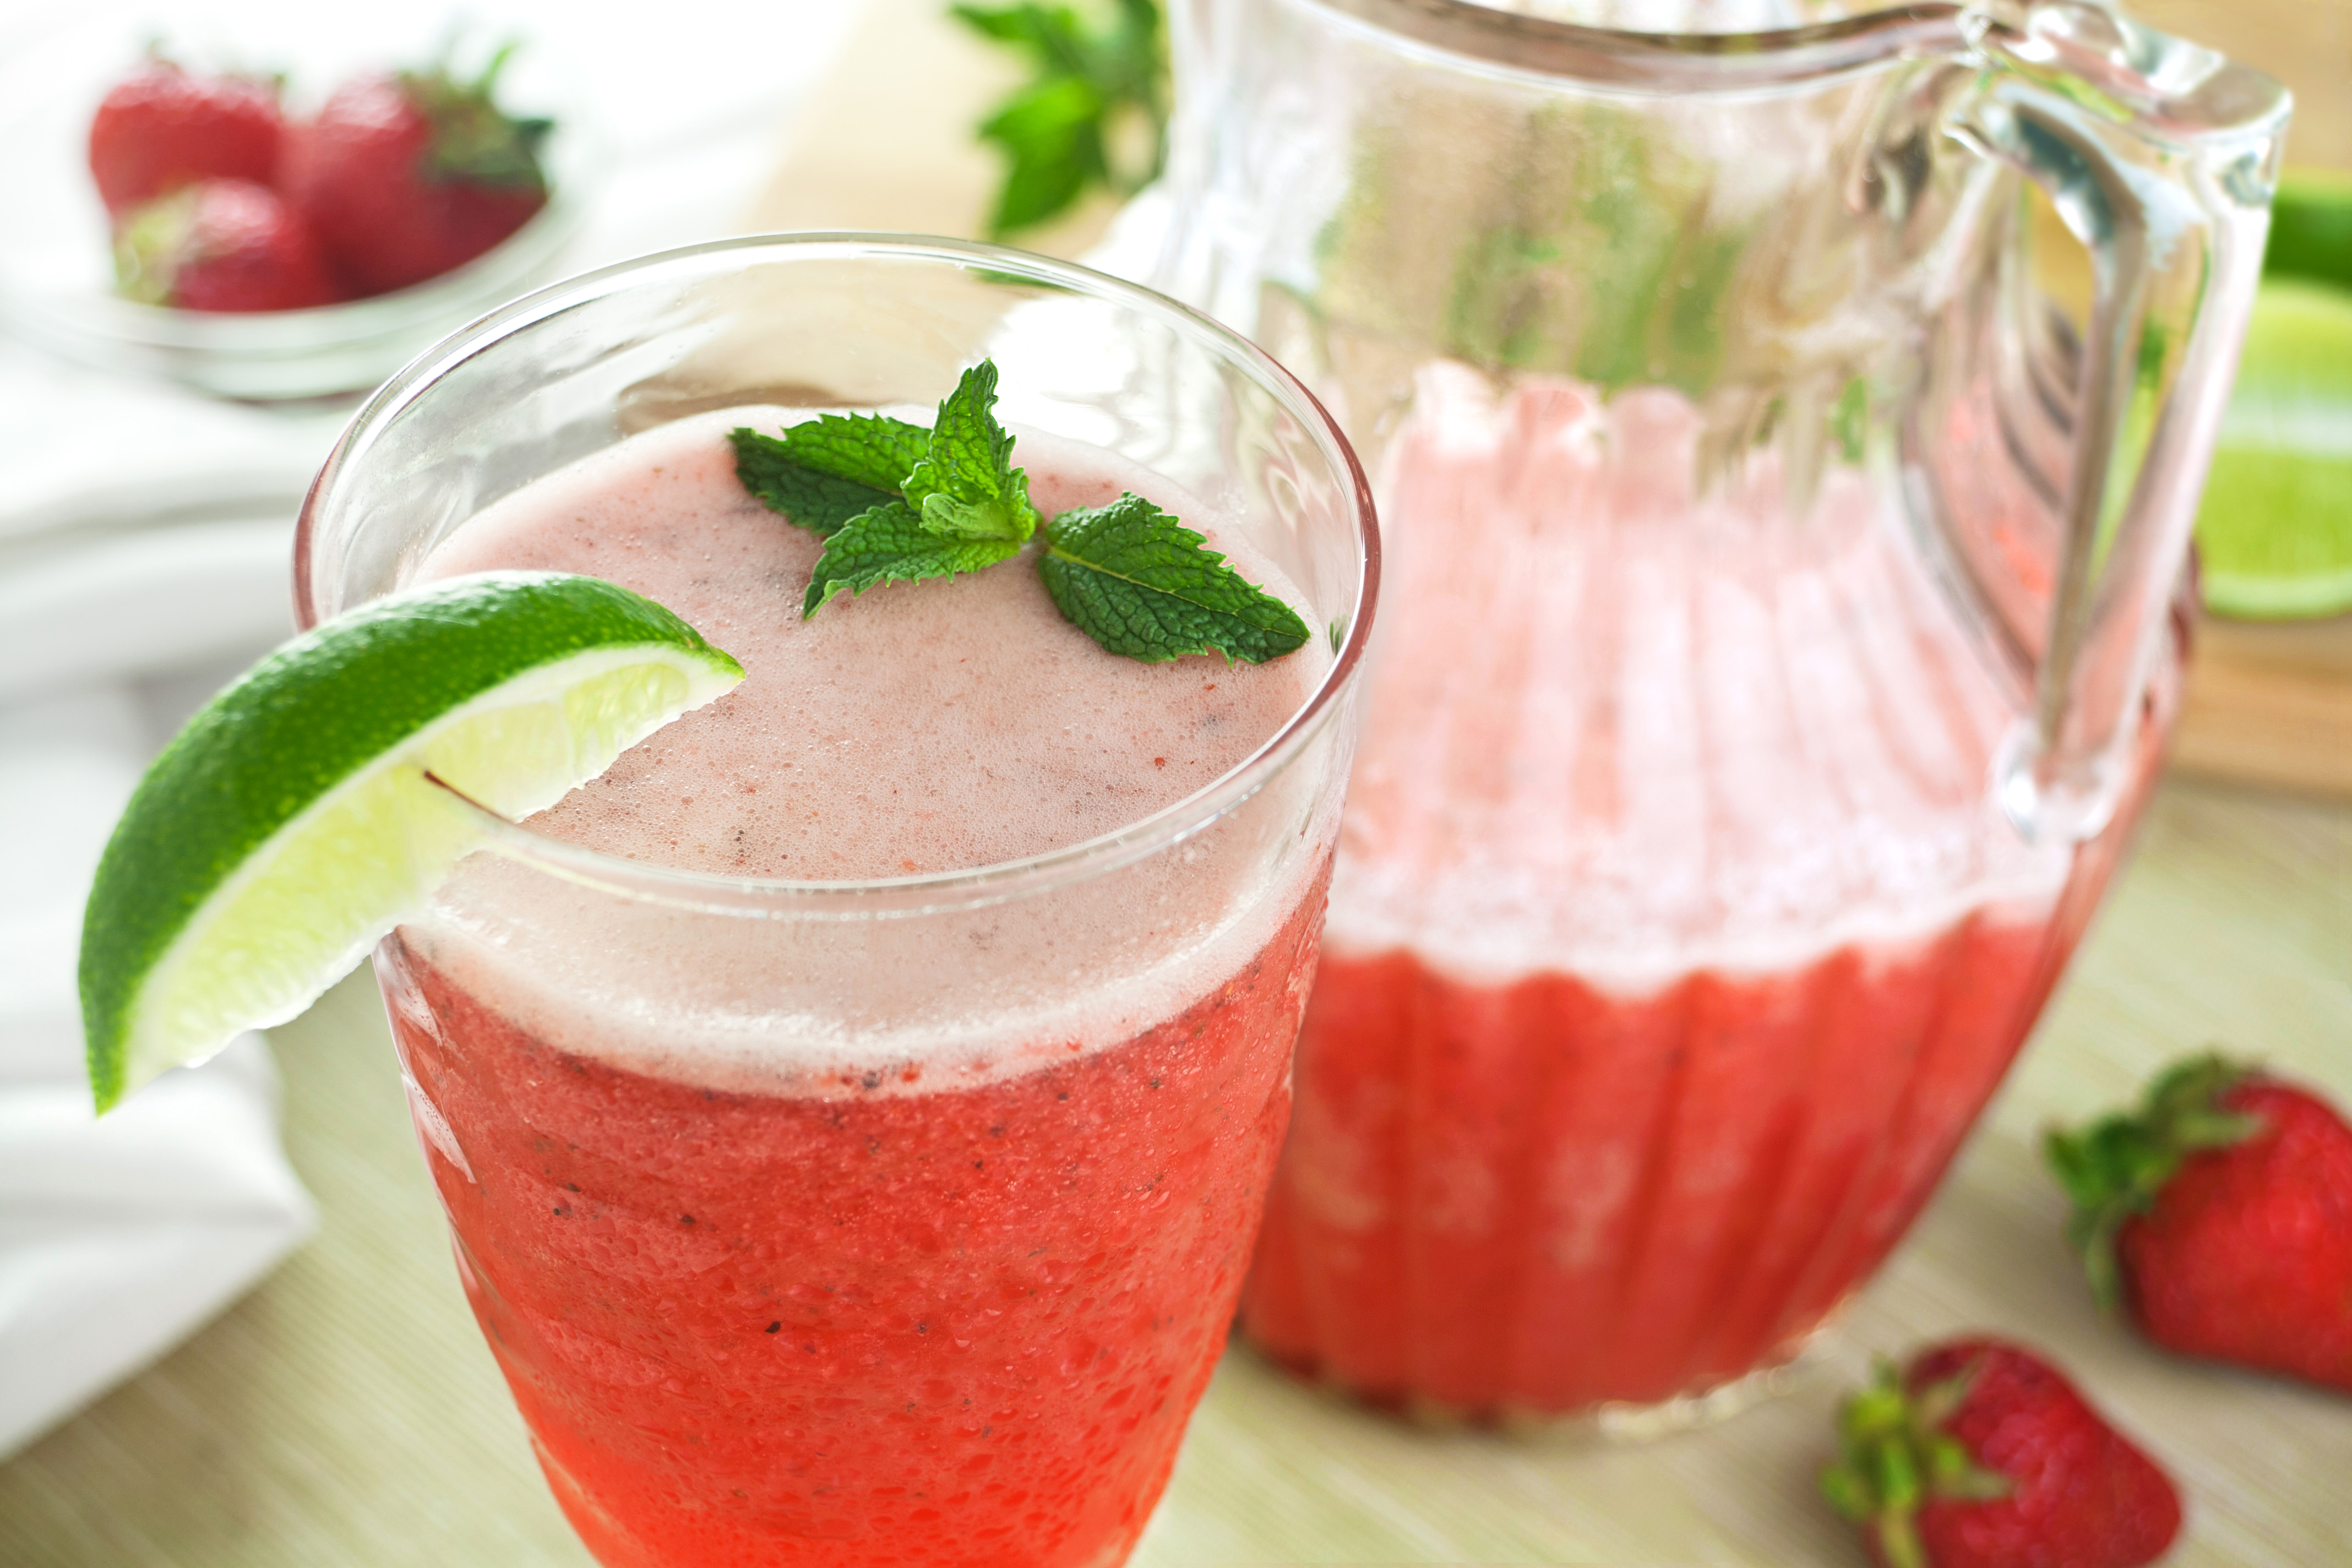 After a workout, Strawberry Mint Spritzer is a refreshing way to rehydrate.